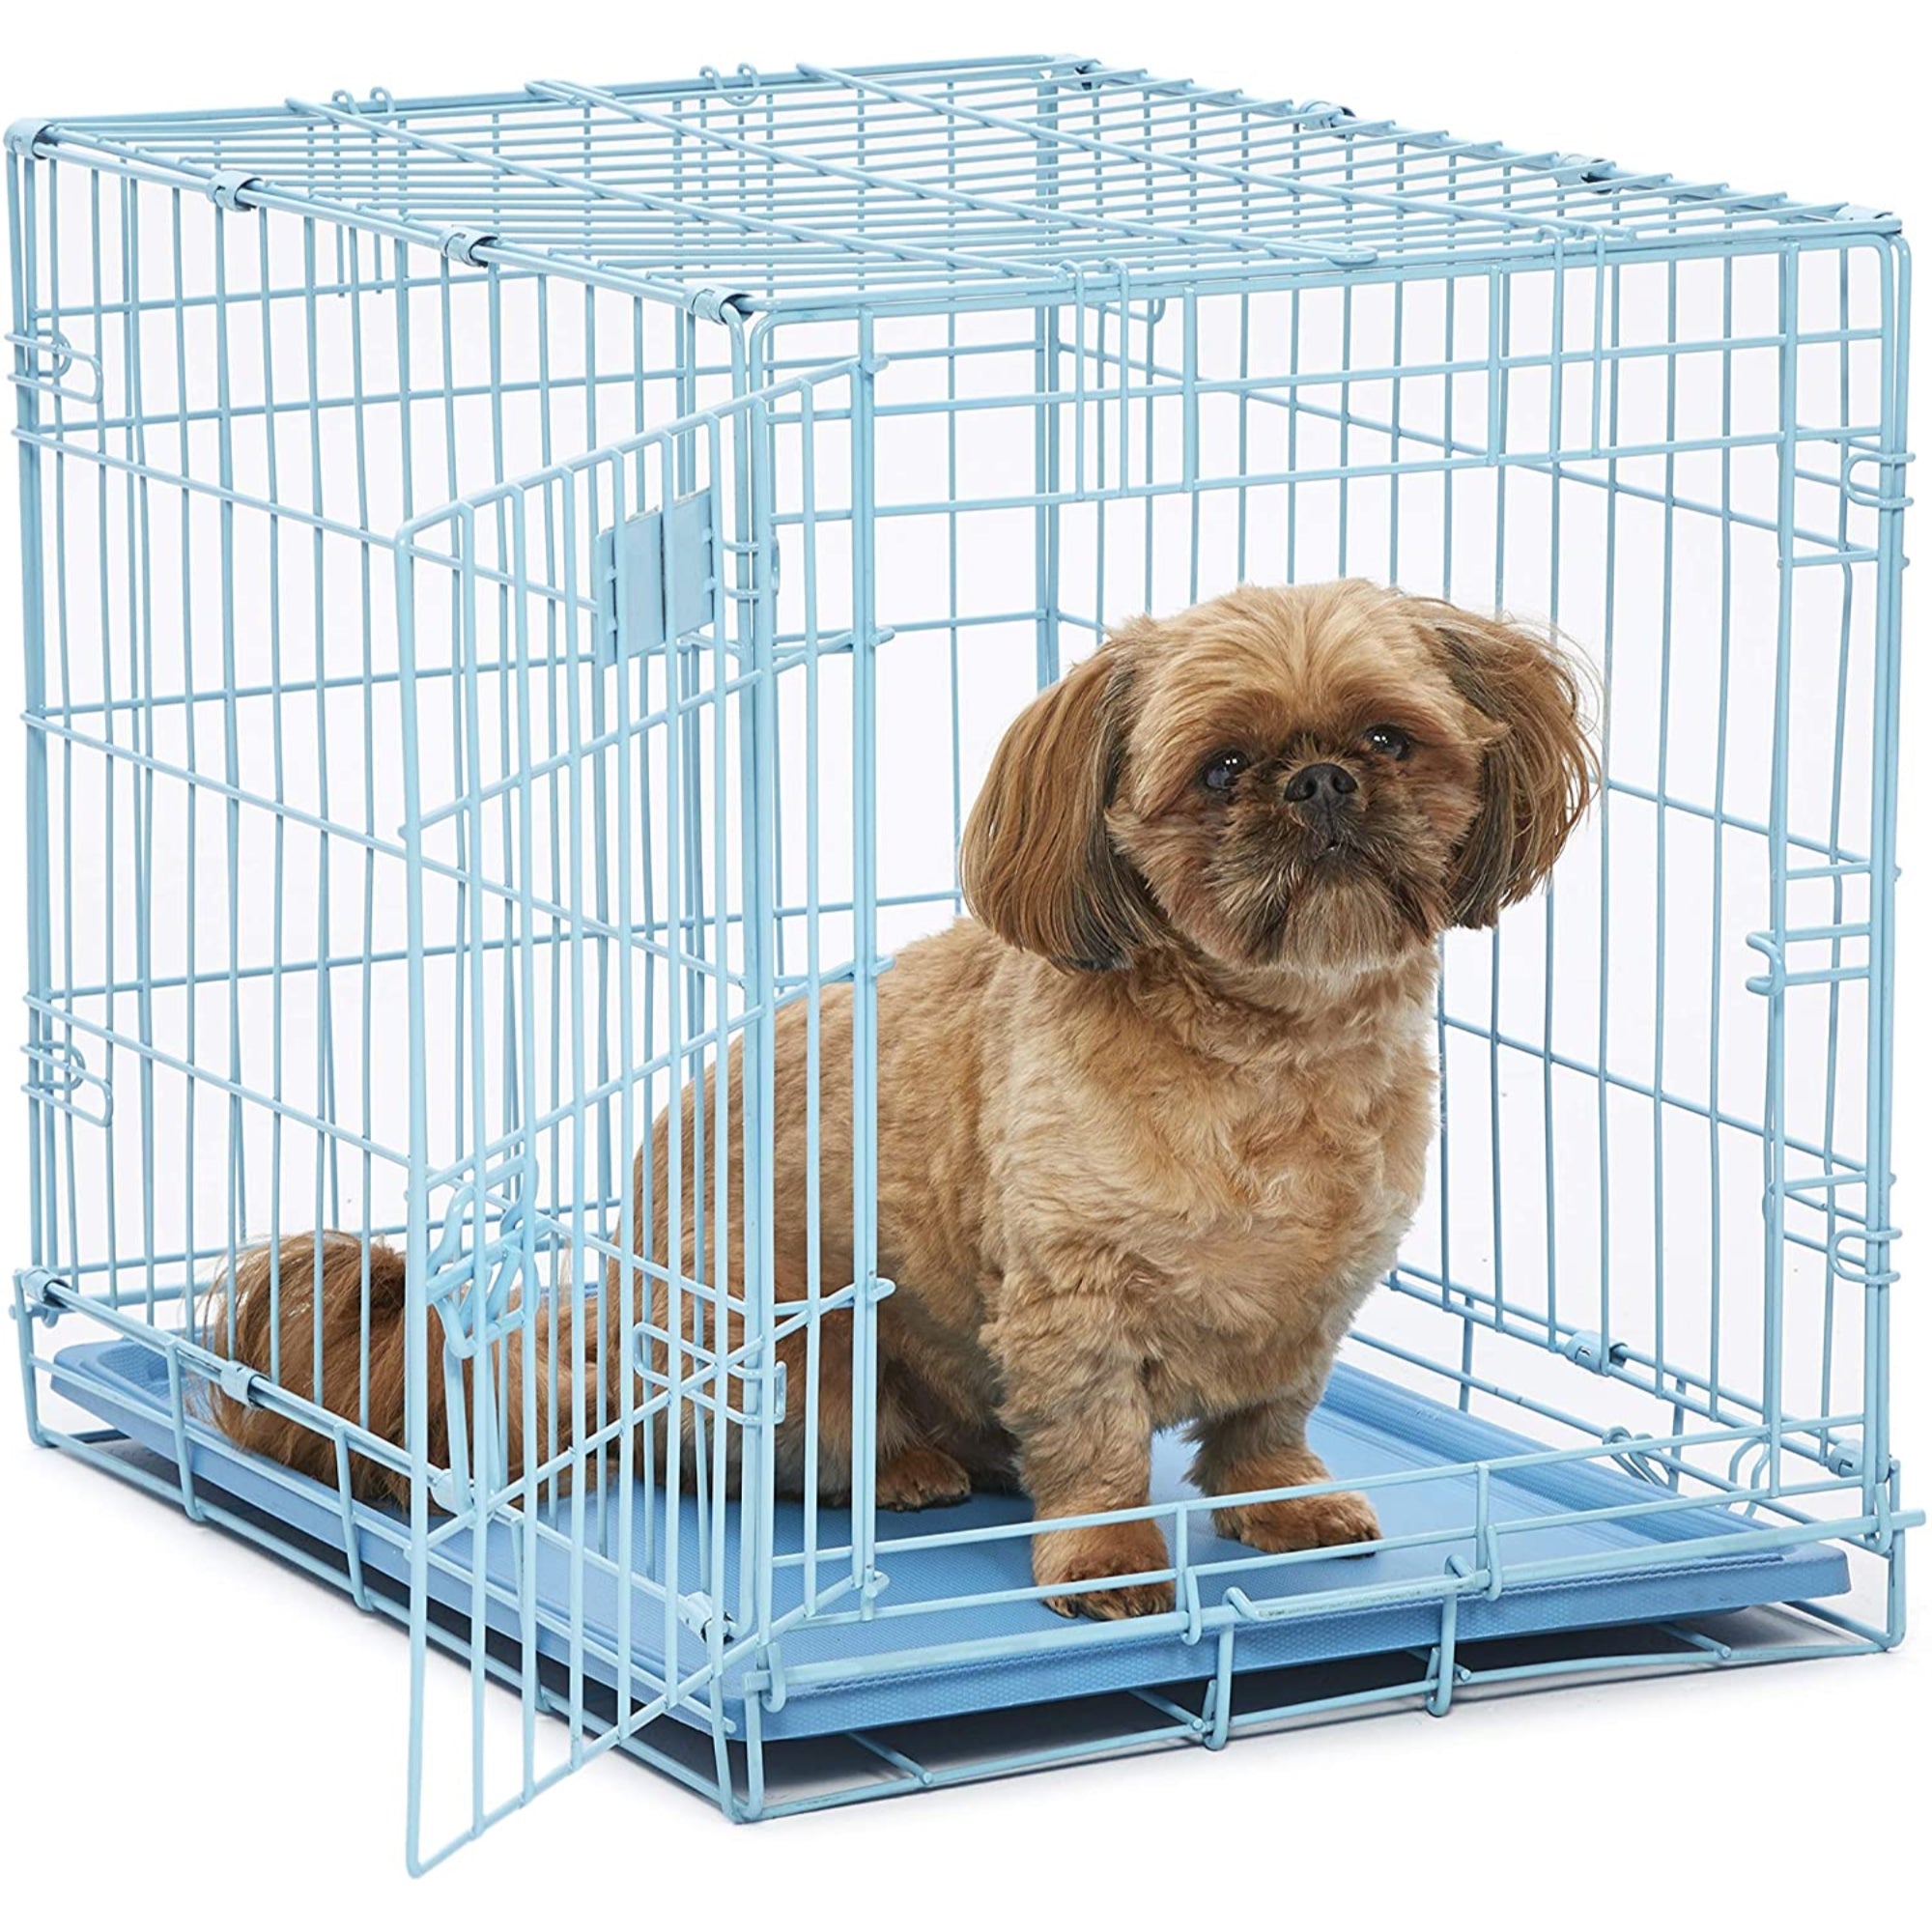 Midwest iCrate Single Door Dog Crate, Small Dog, Blue 24" H